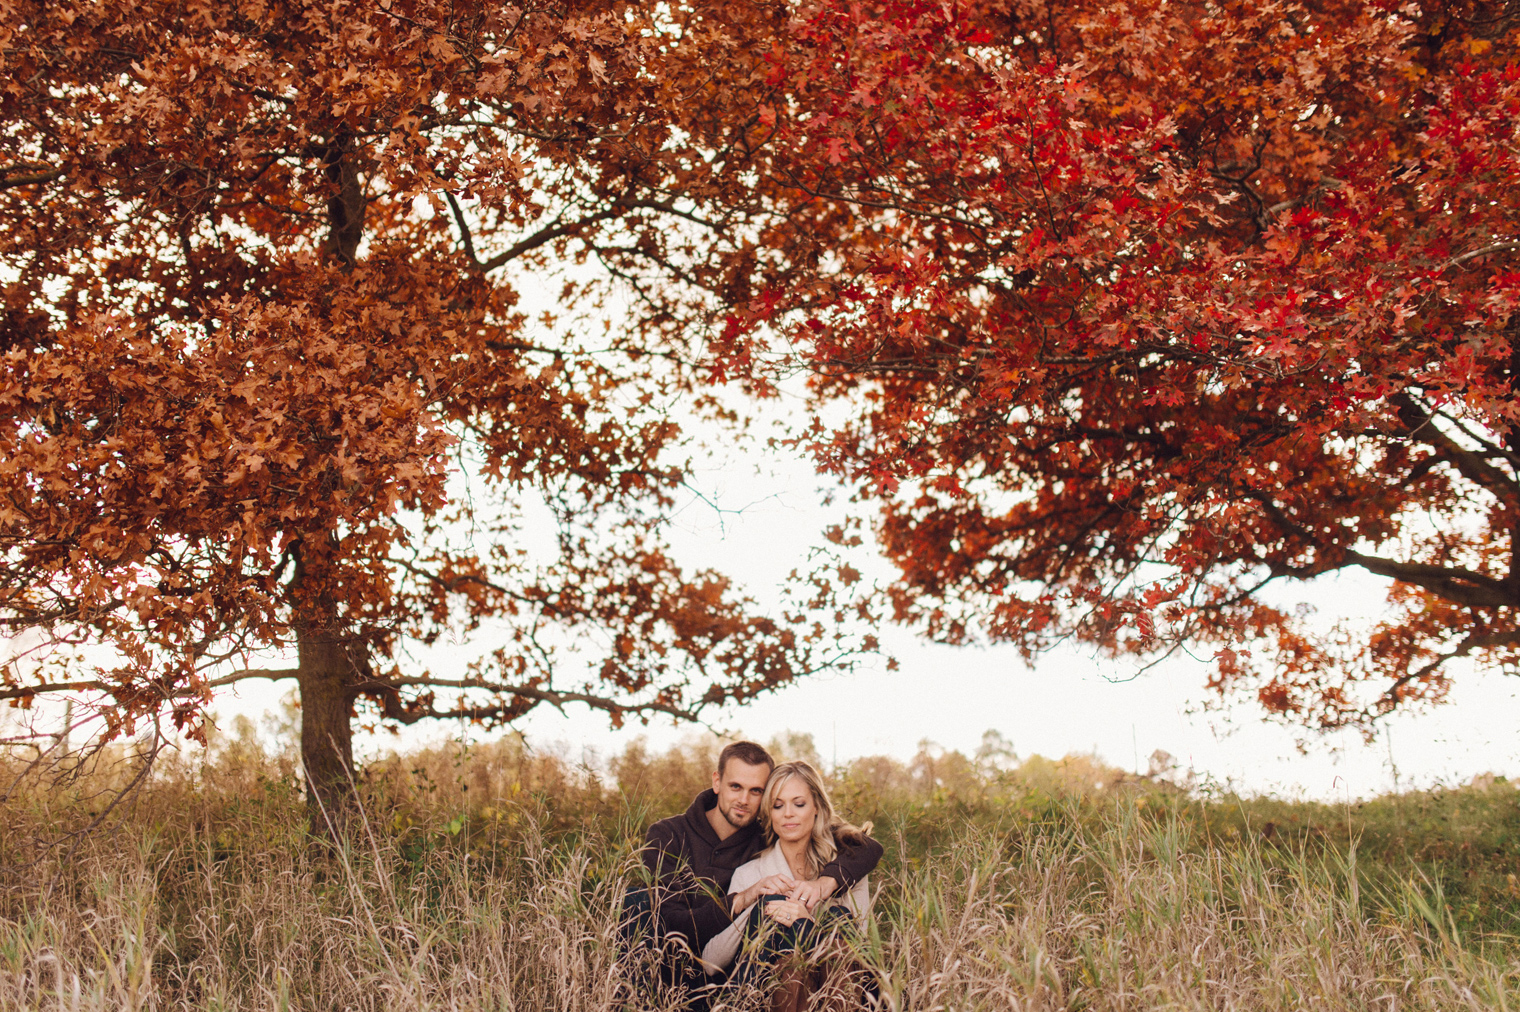 Bright red fall foliage at a fall couples photographyn at the Ann Arbor Botanical Gardens by wedding photographer Heather Jowett.